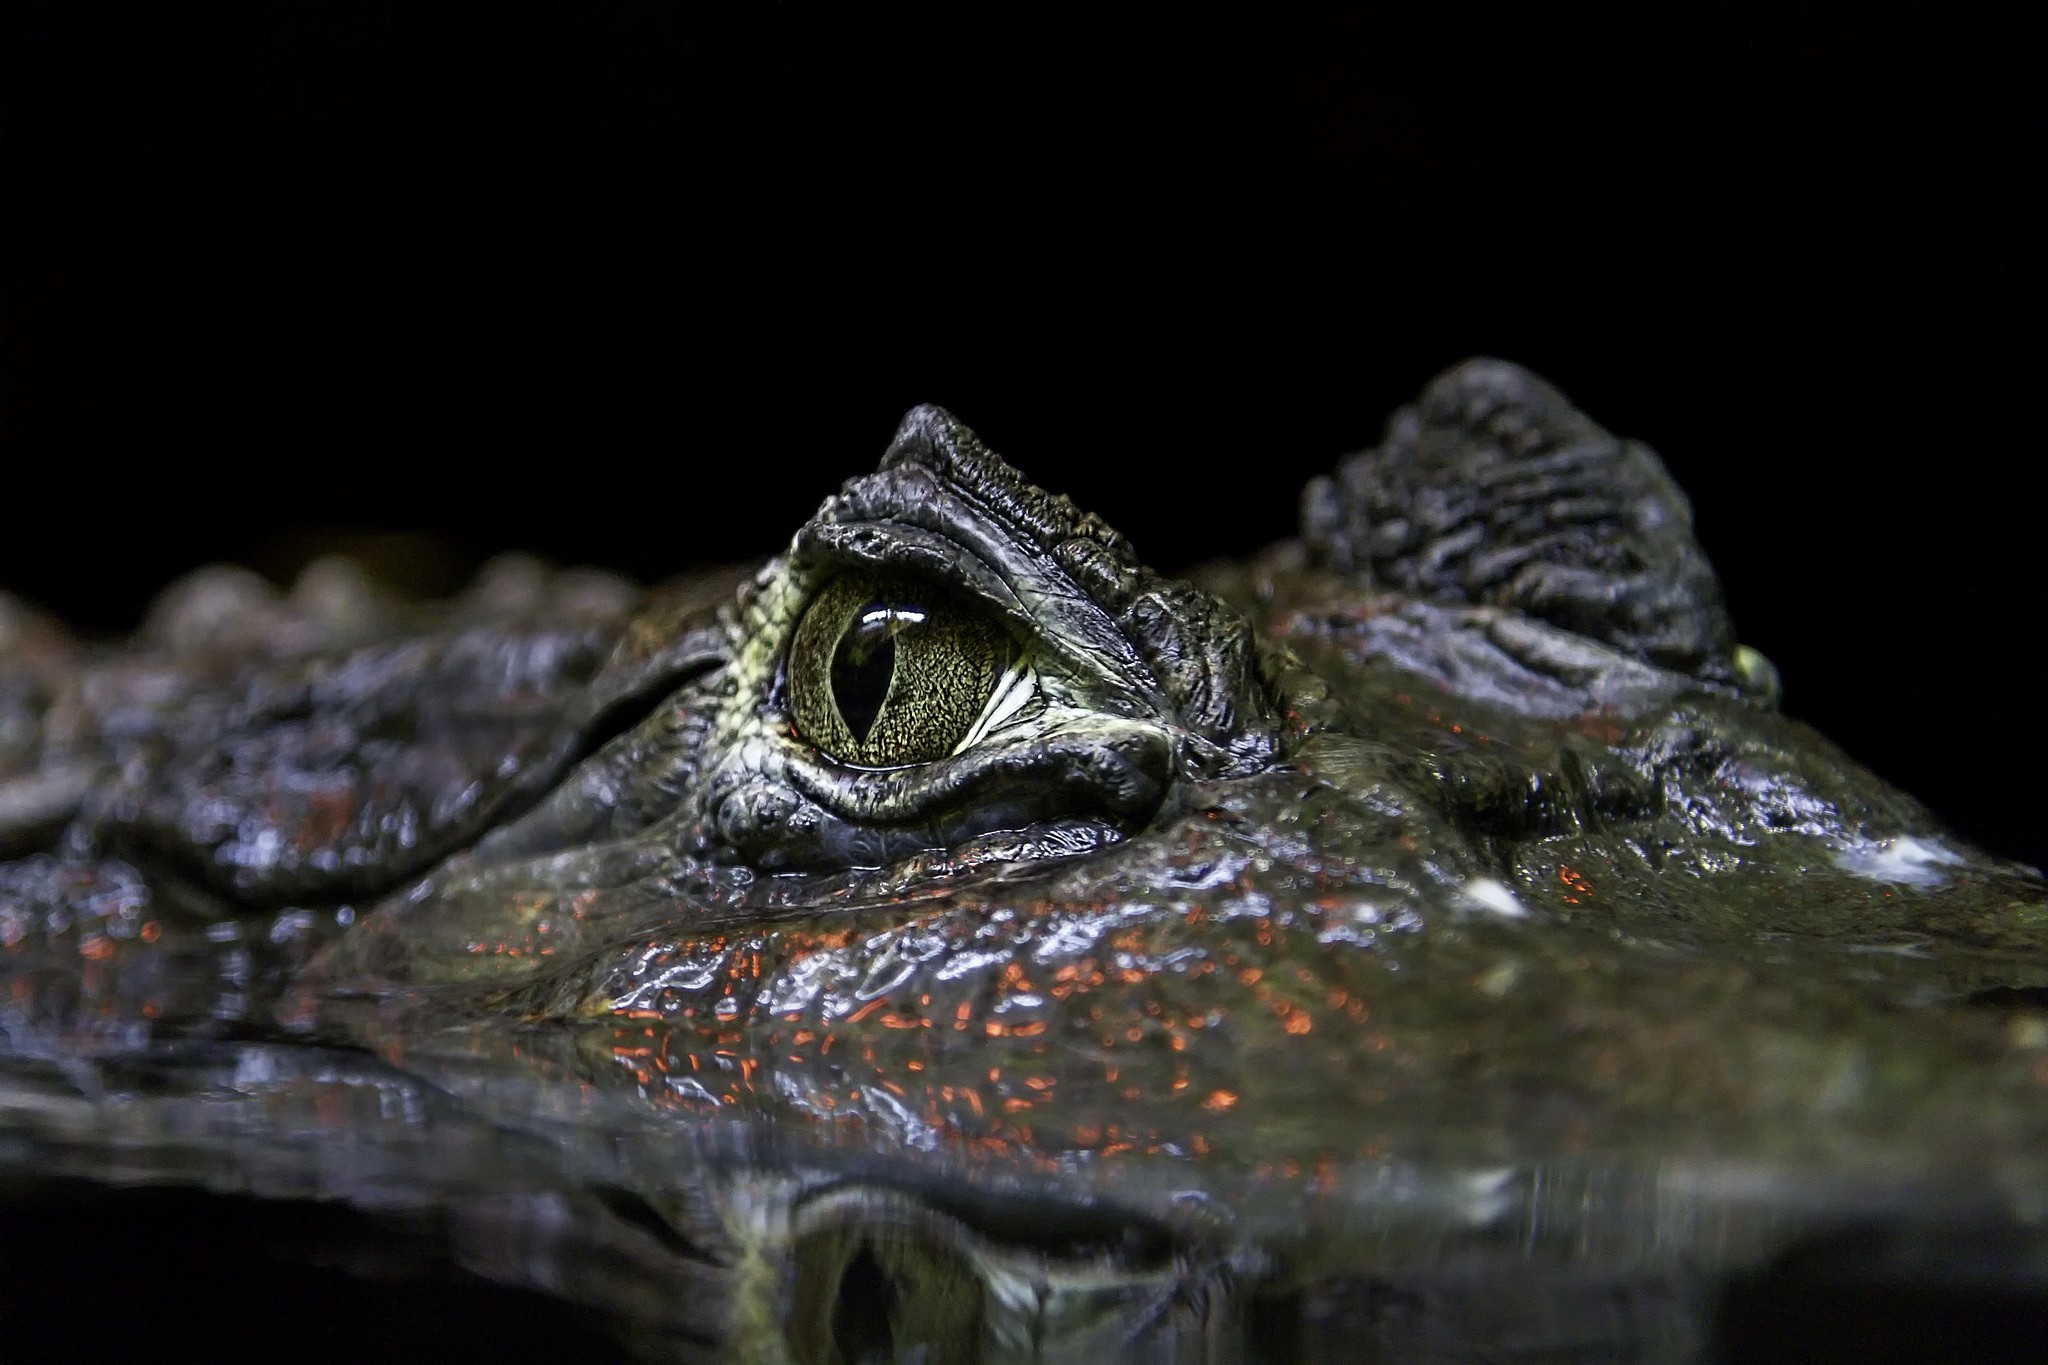 General 2048x1365 animals reptiles water reflection